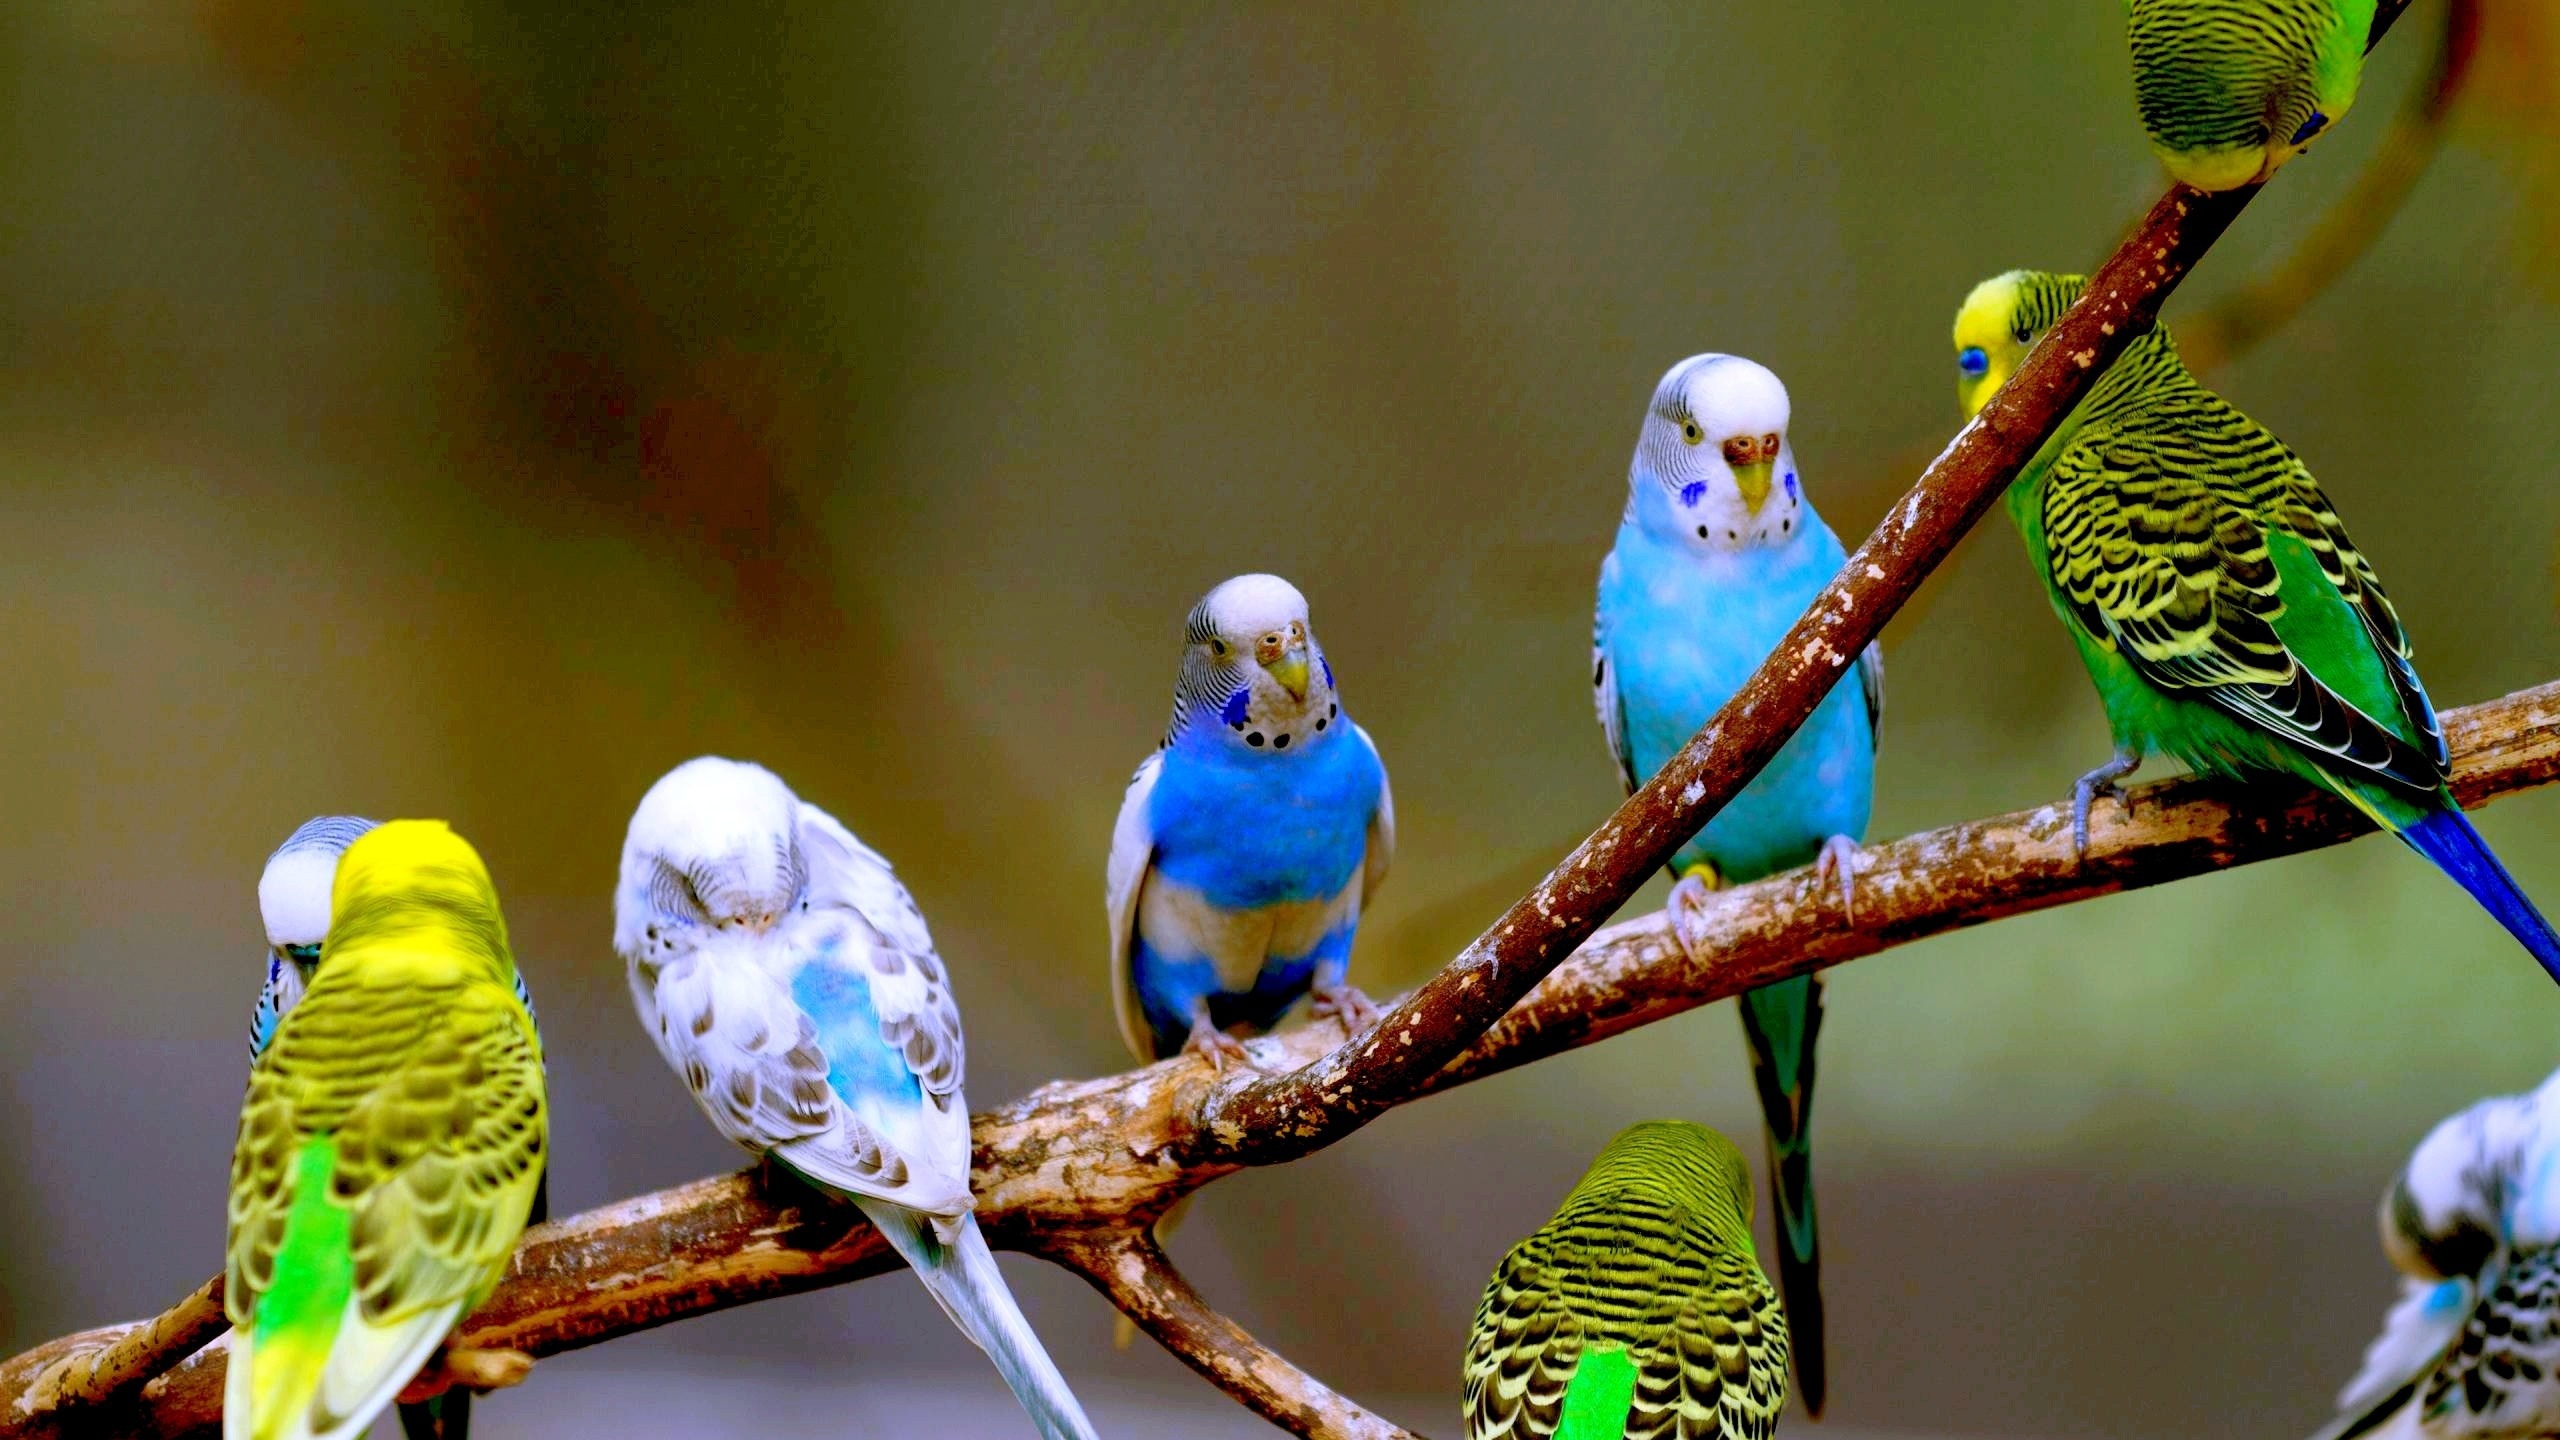 Budgie Images